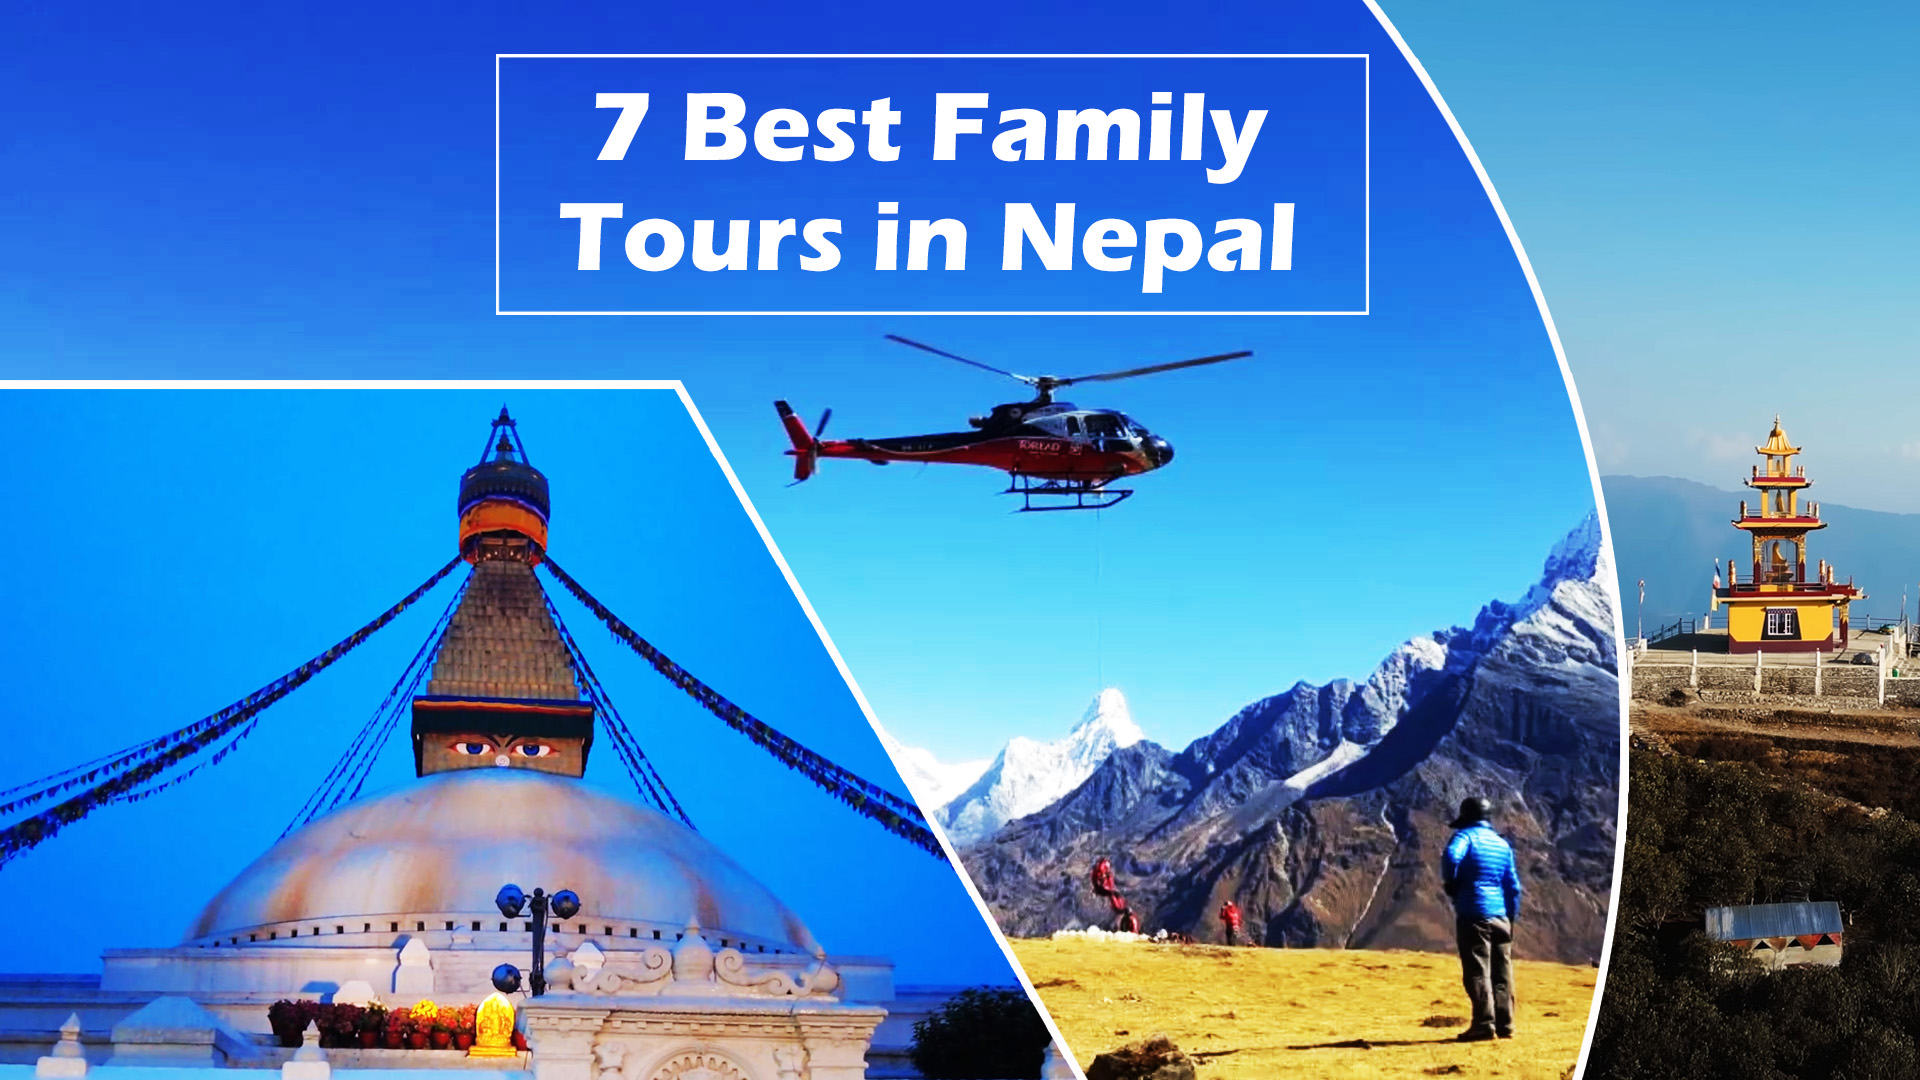 7 Best Family Tours in Nepal